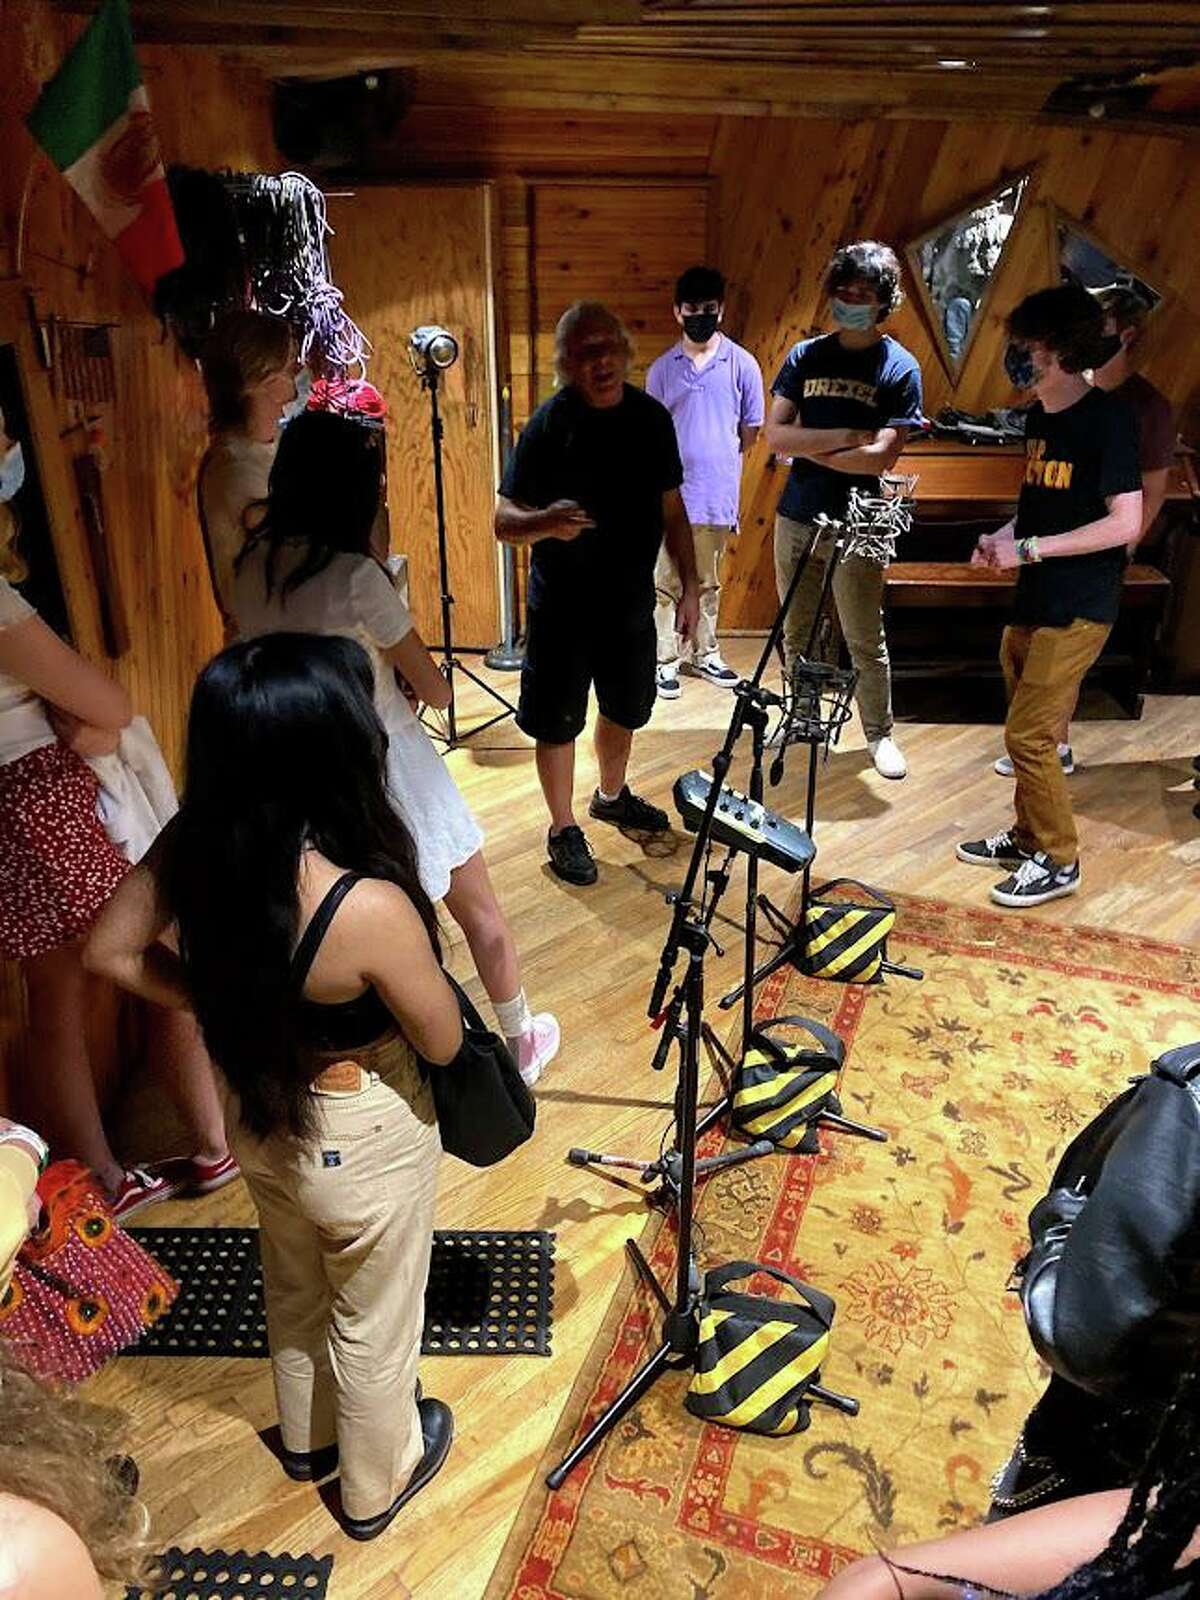 New Canaan School of Rock students recently participated in the 2021 AllStars Music Program that took place at the Carriage House Studios in Stamford. The team recorded seven songs, including an original song that was written by their songwriter.